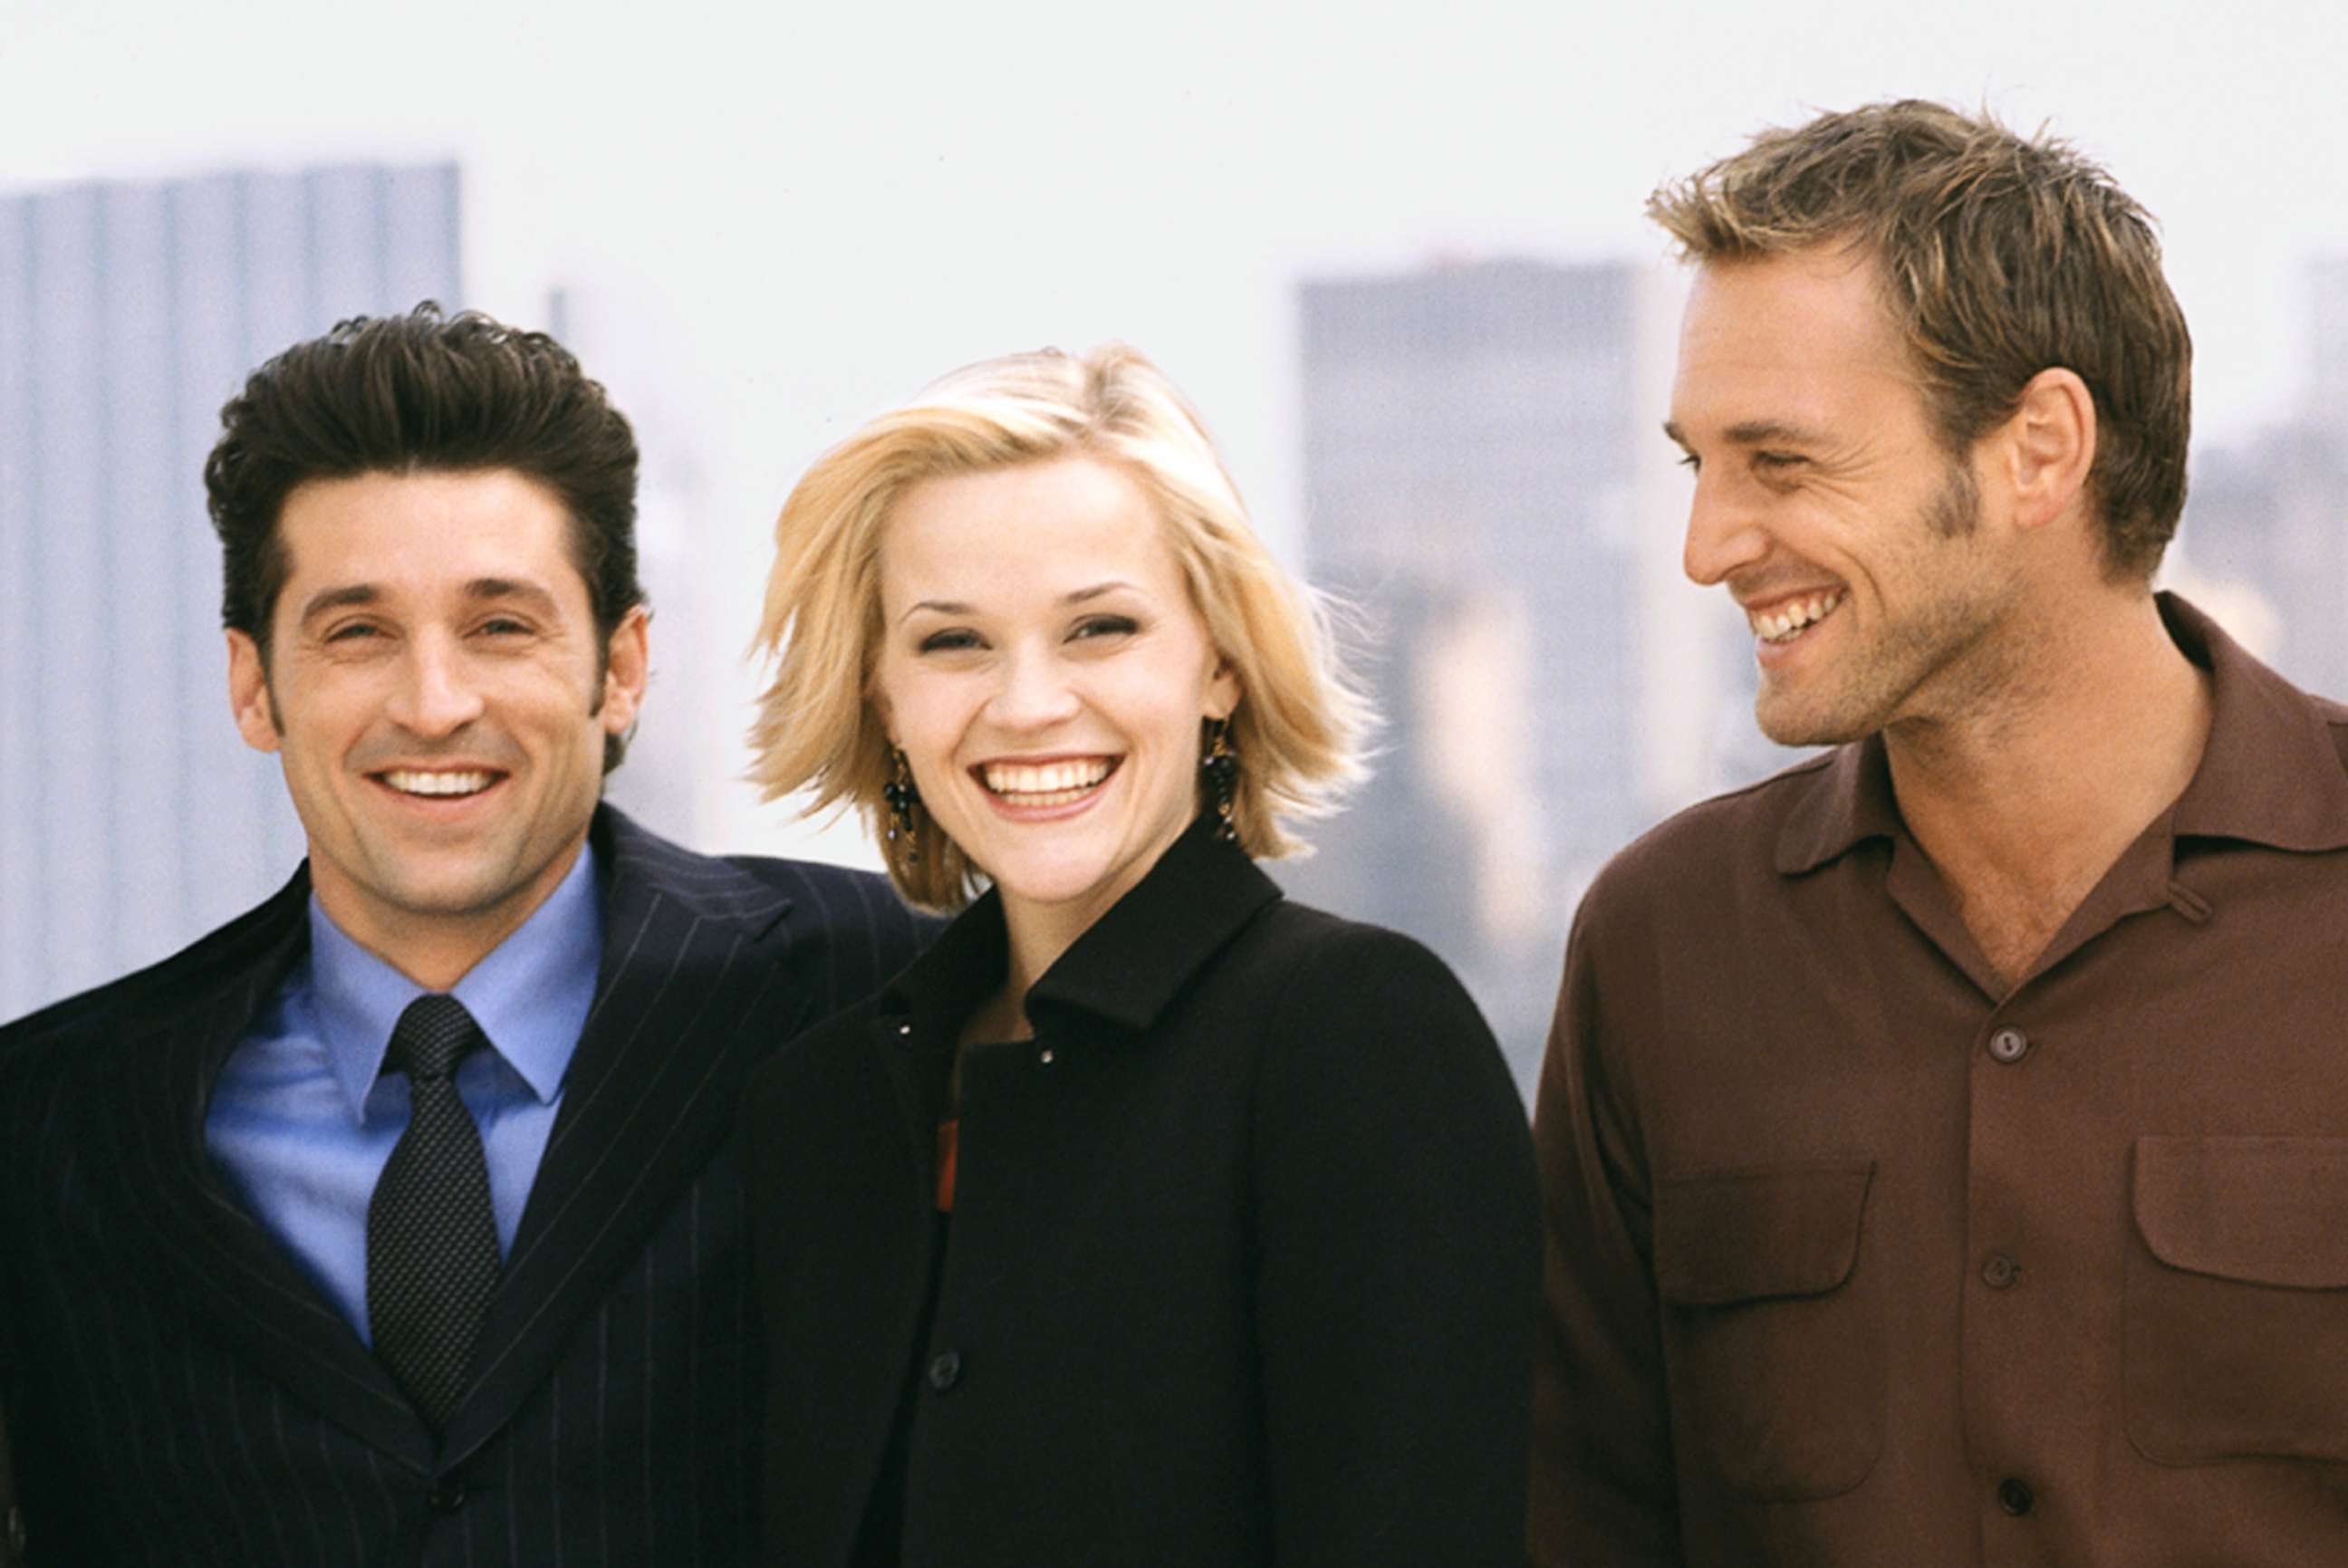 PHOTO: Patrick Dempsey, Reese Witherspoon and Josh Lucas appear in a scene from "Sweet Home Alabama."